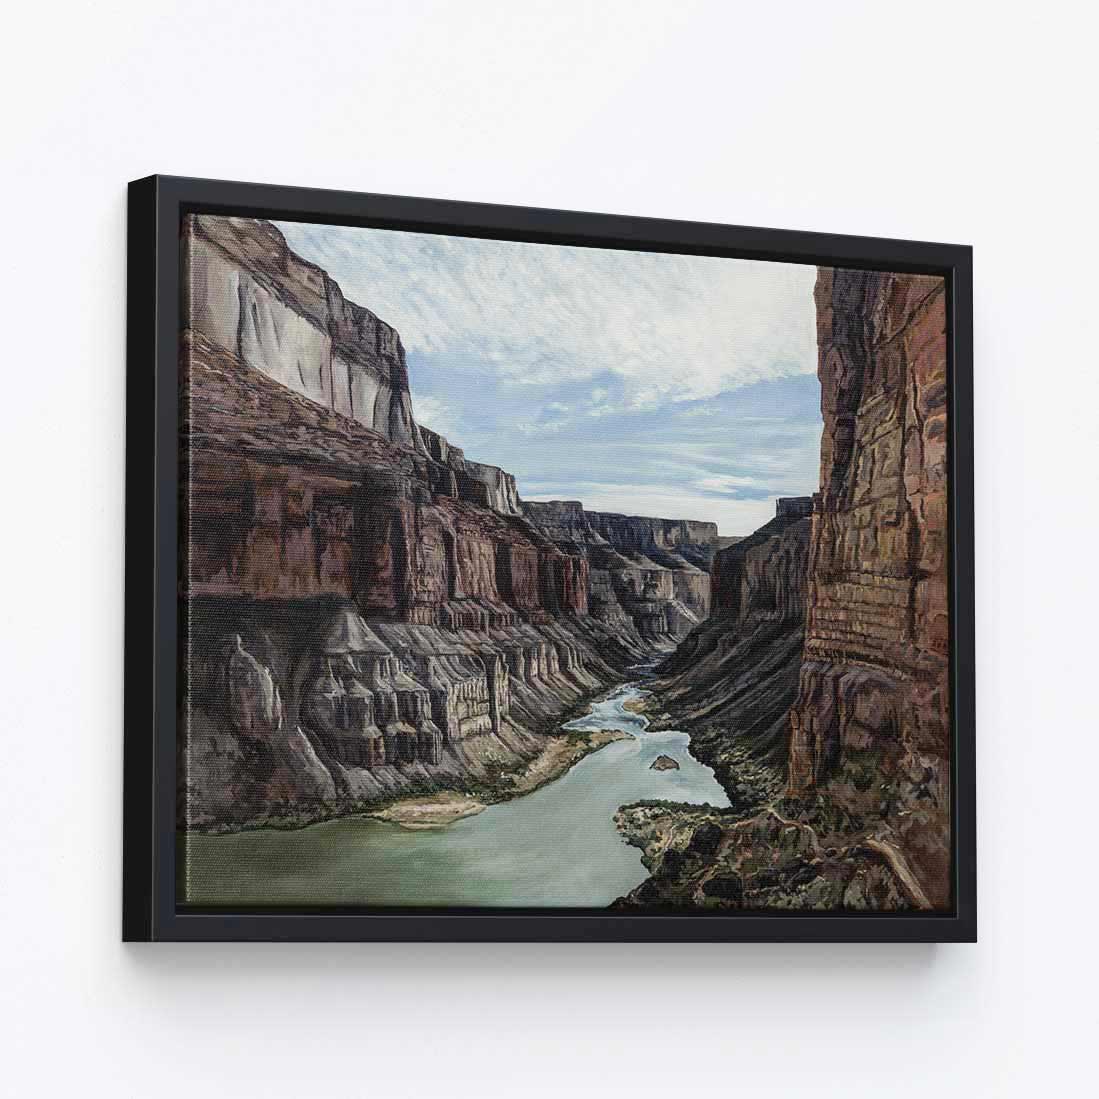 Into the Canyon - Canvas Print by Kristen Fogarty | Art Bloom Canvas Art